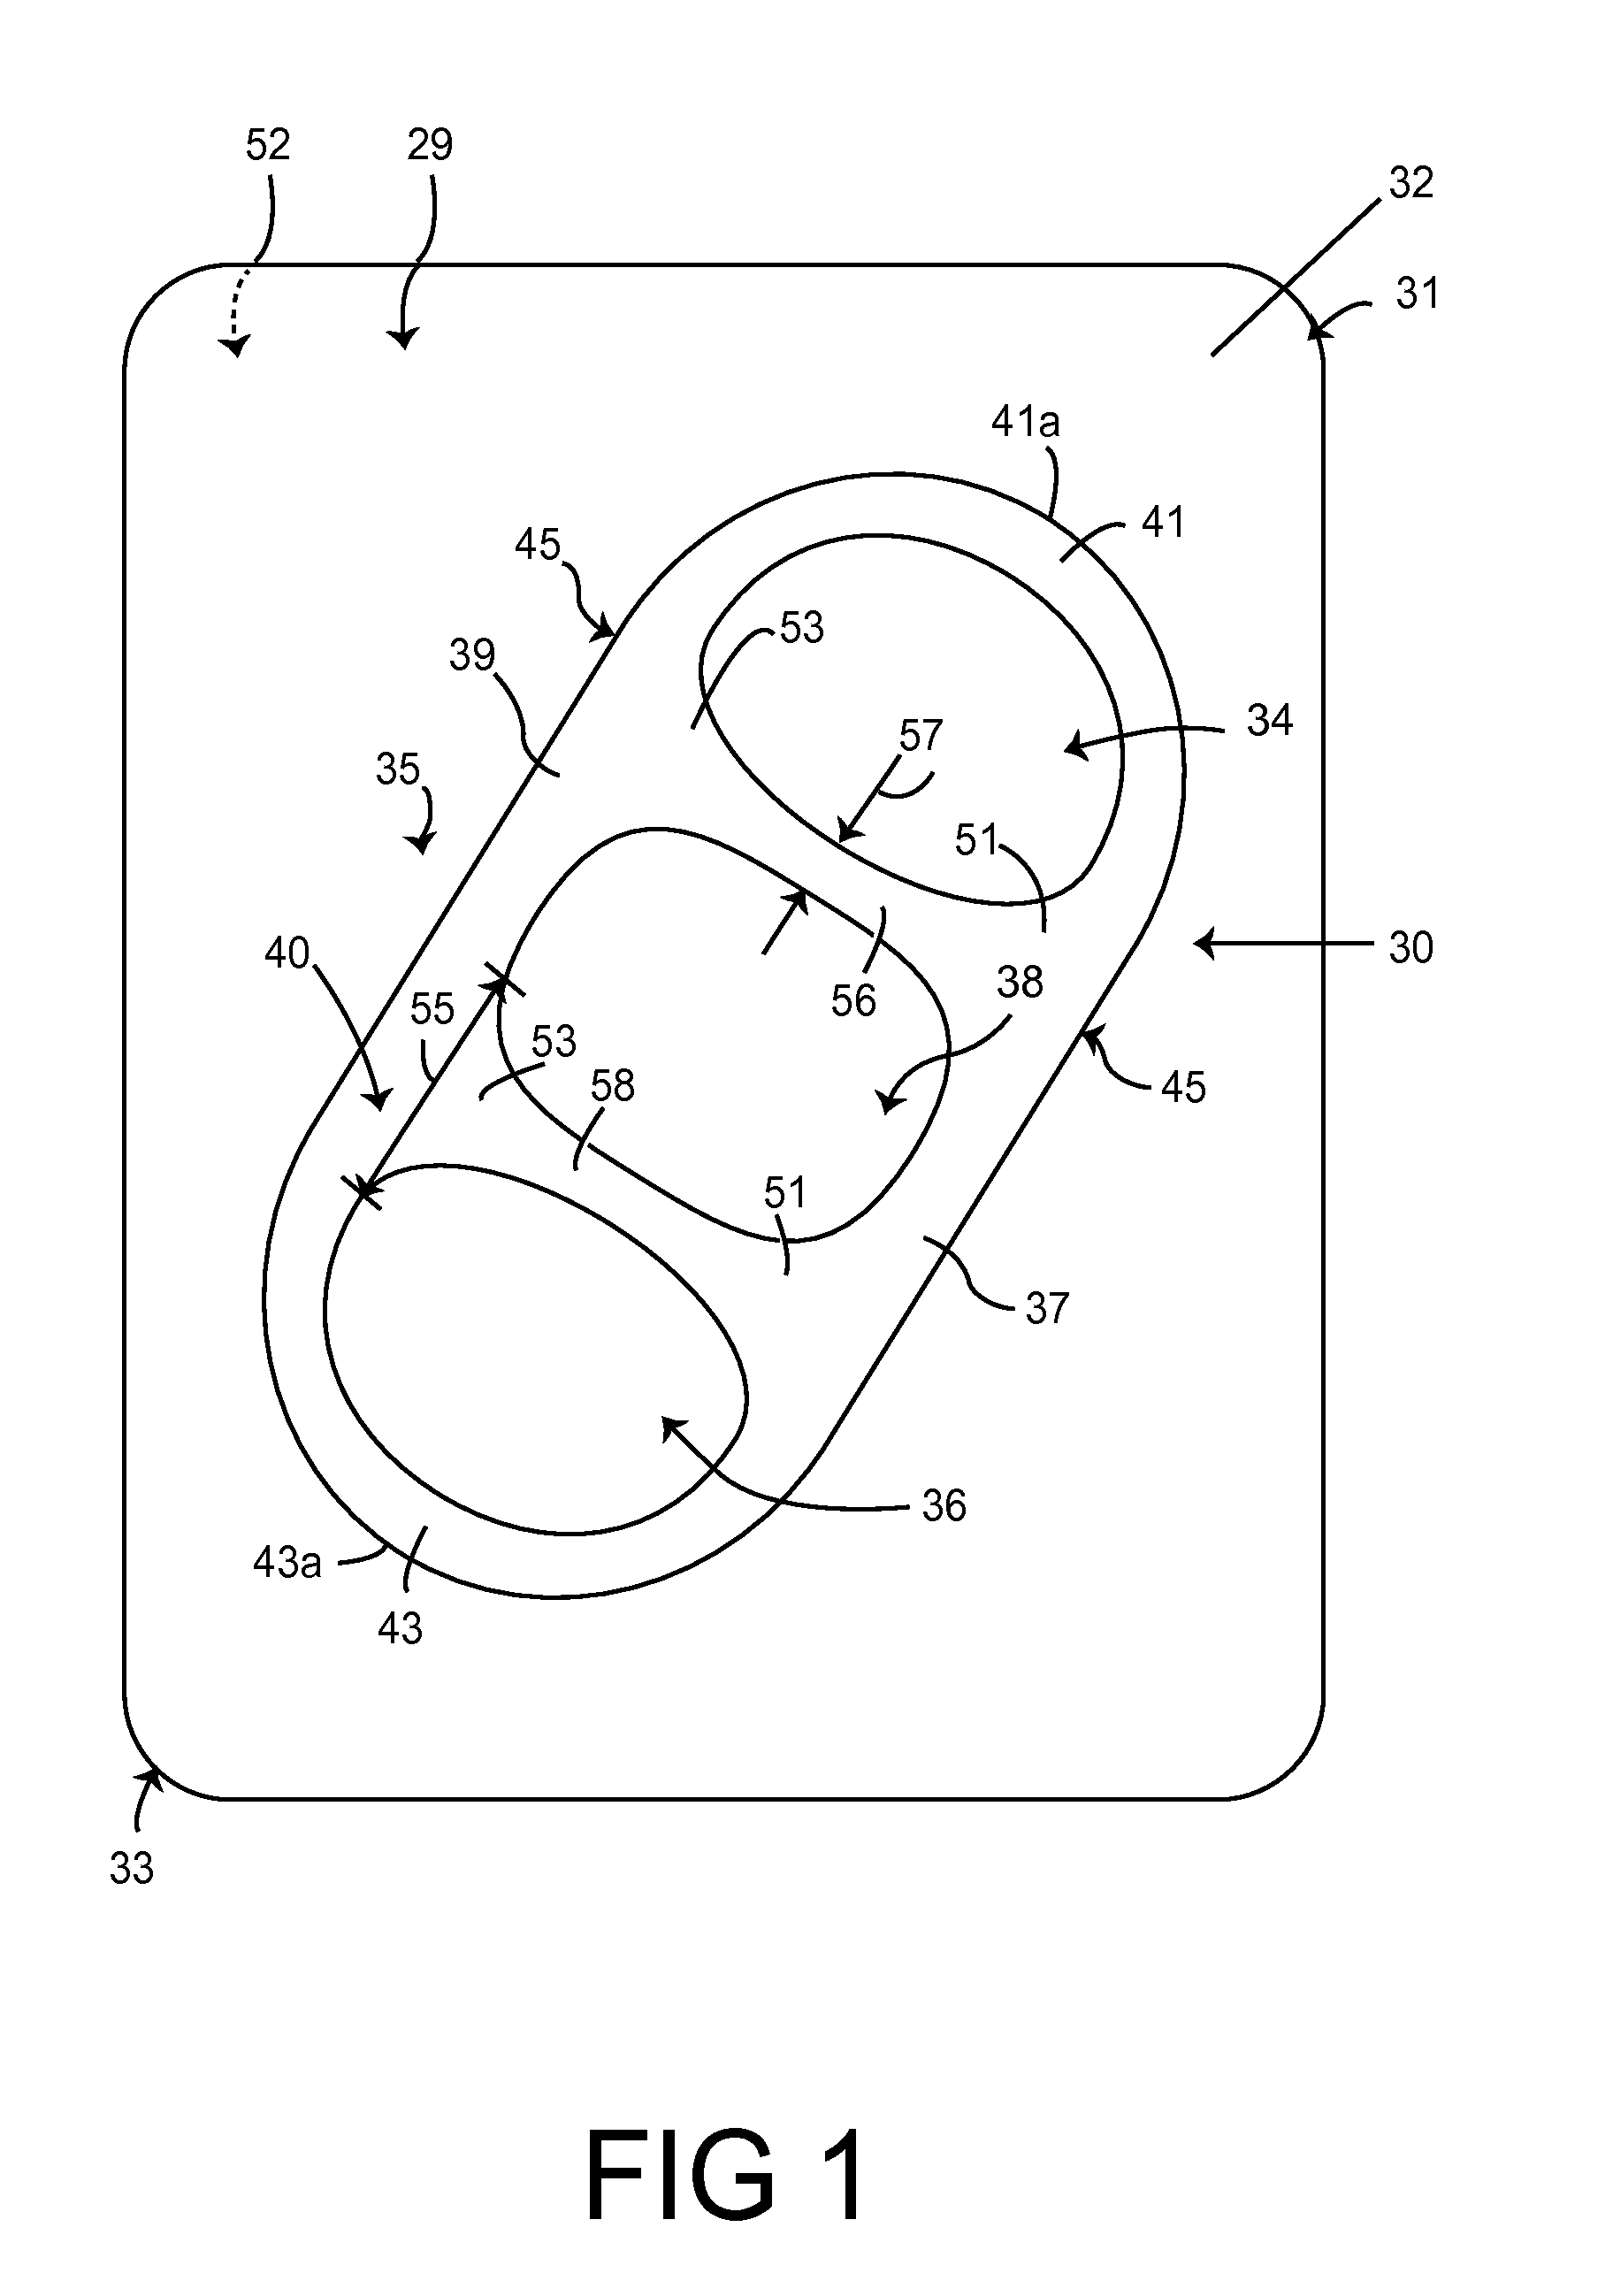 One-handed, back-based support for a hand-held object